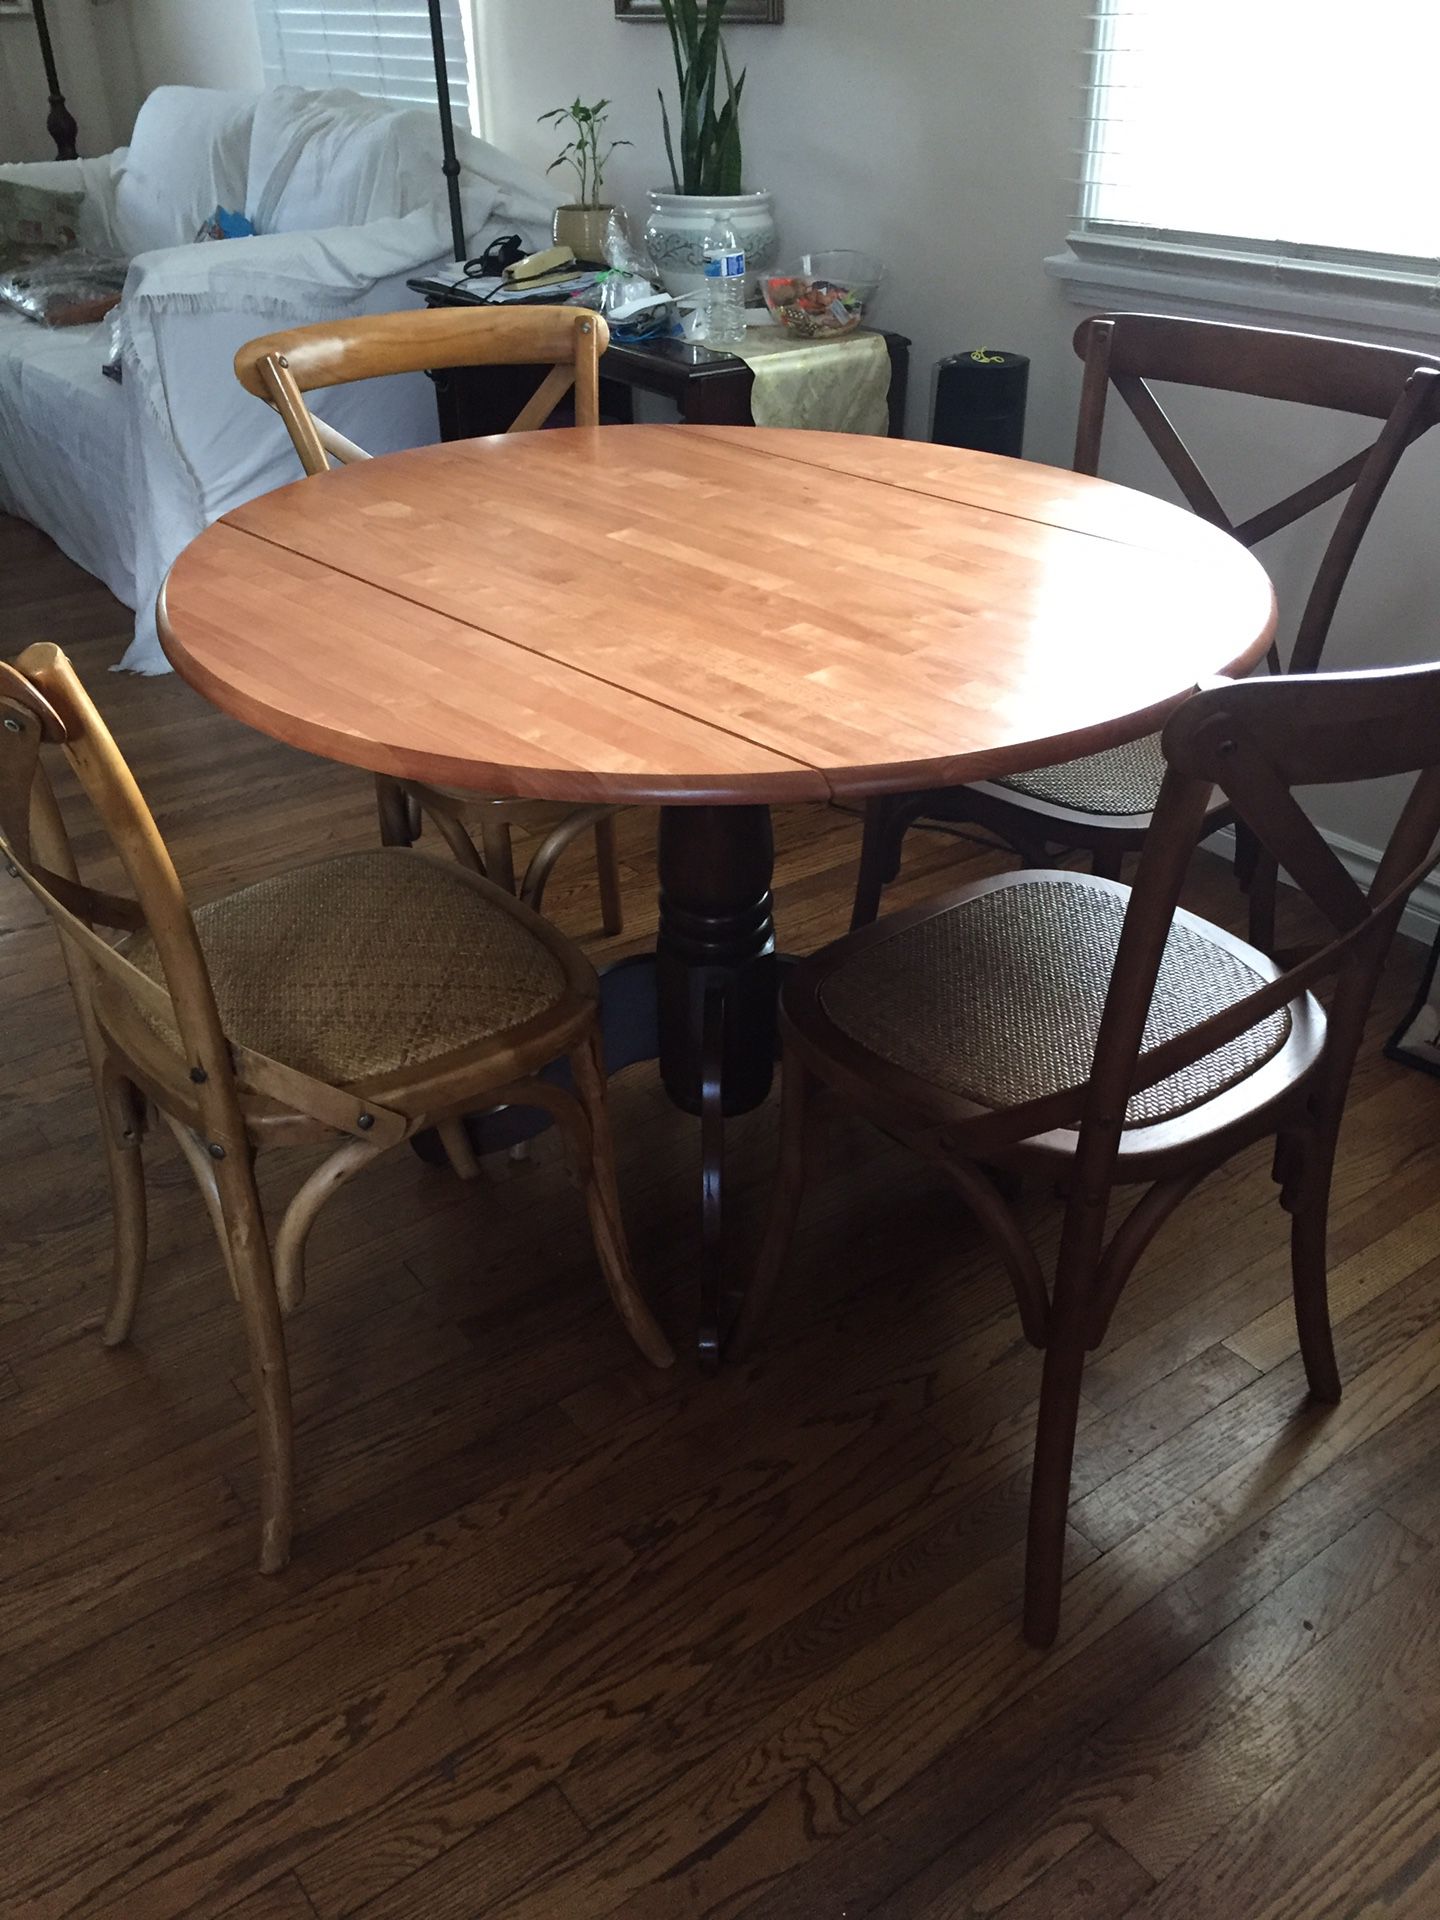 Round breakfast nook adjustable table w/ 4 rattan chairs